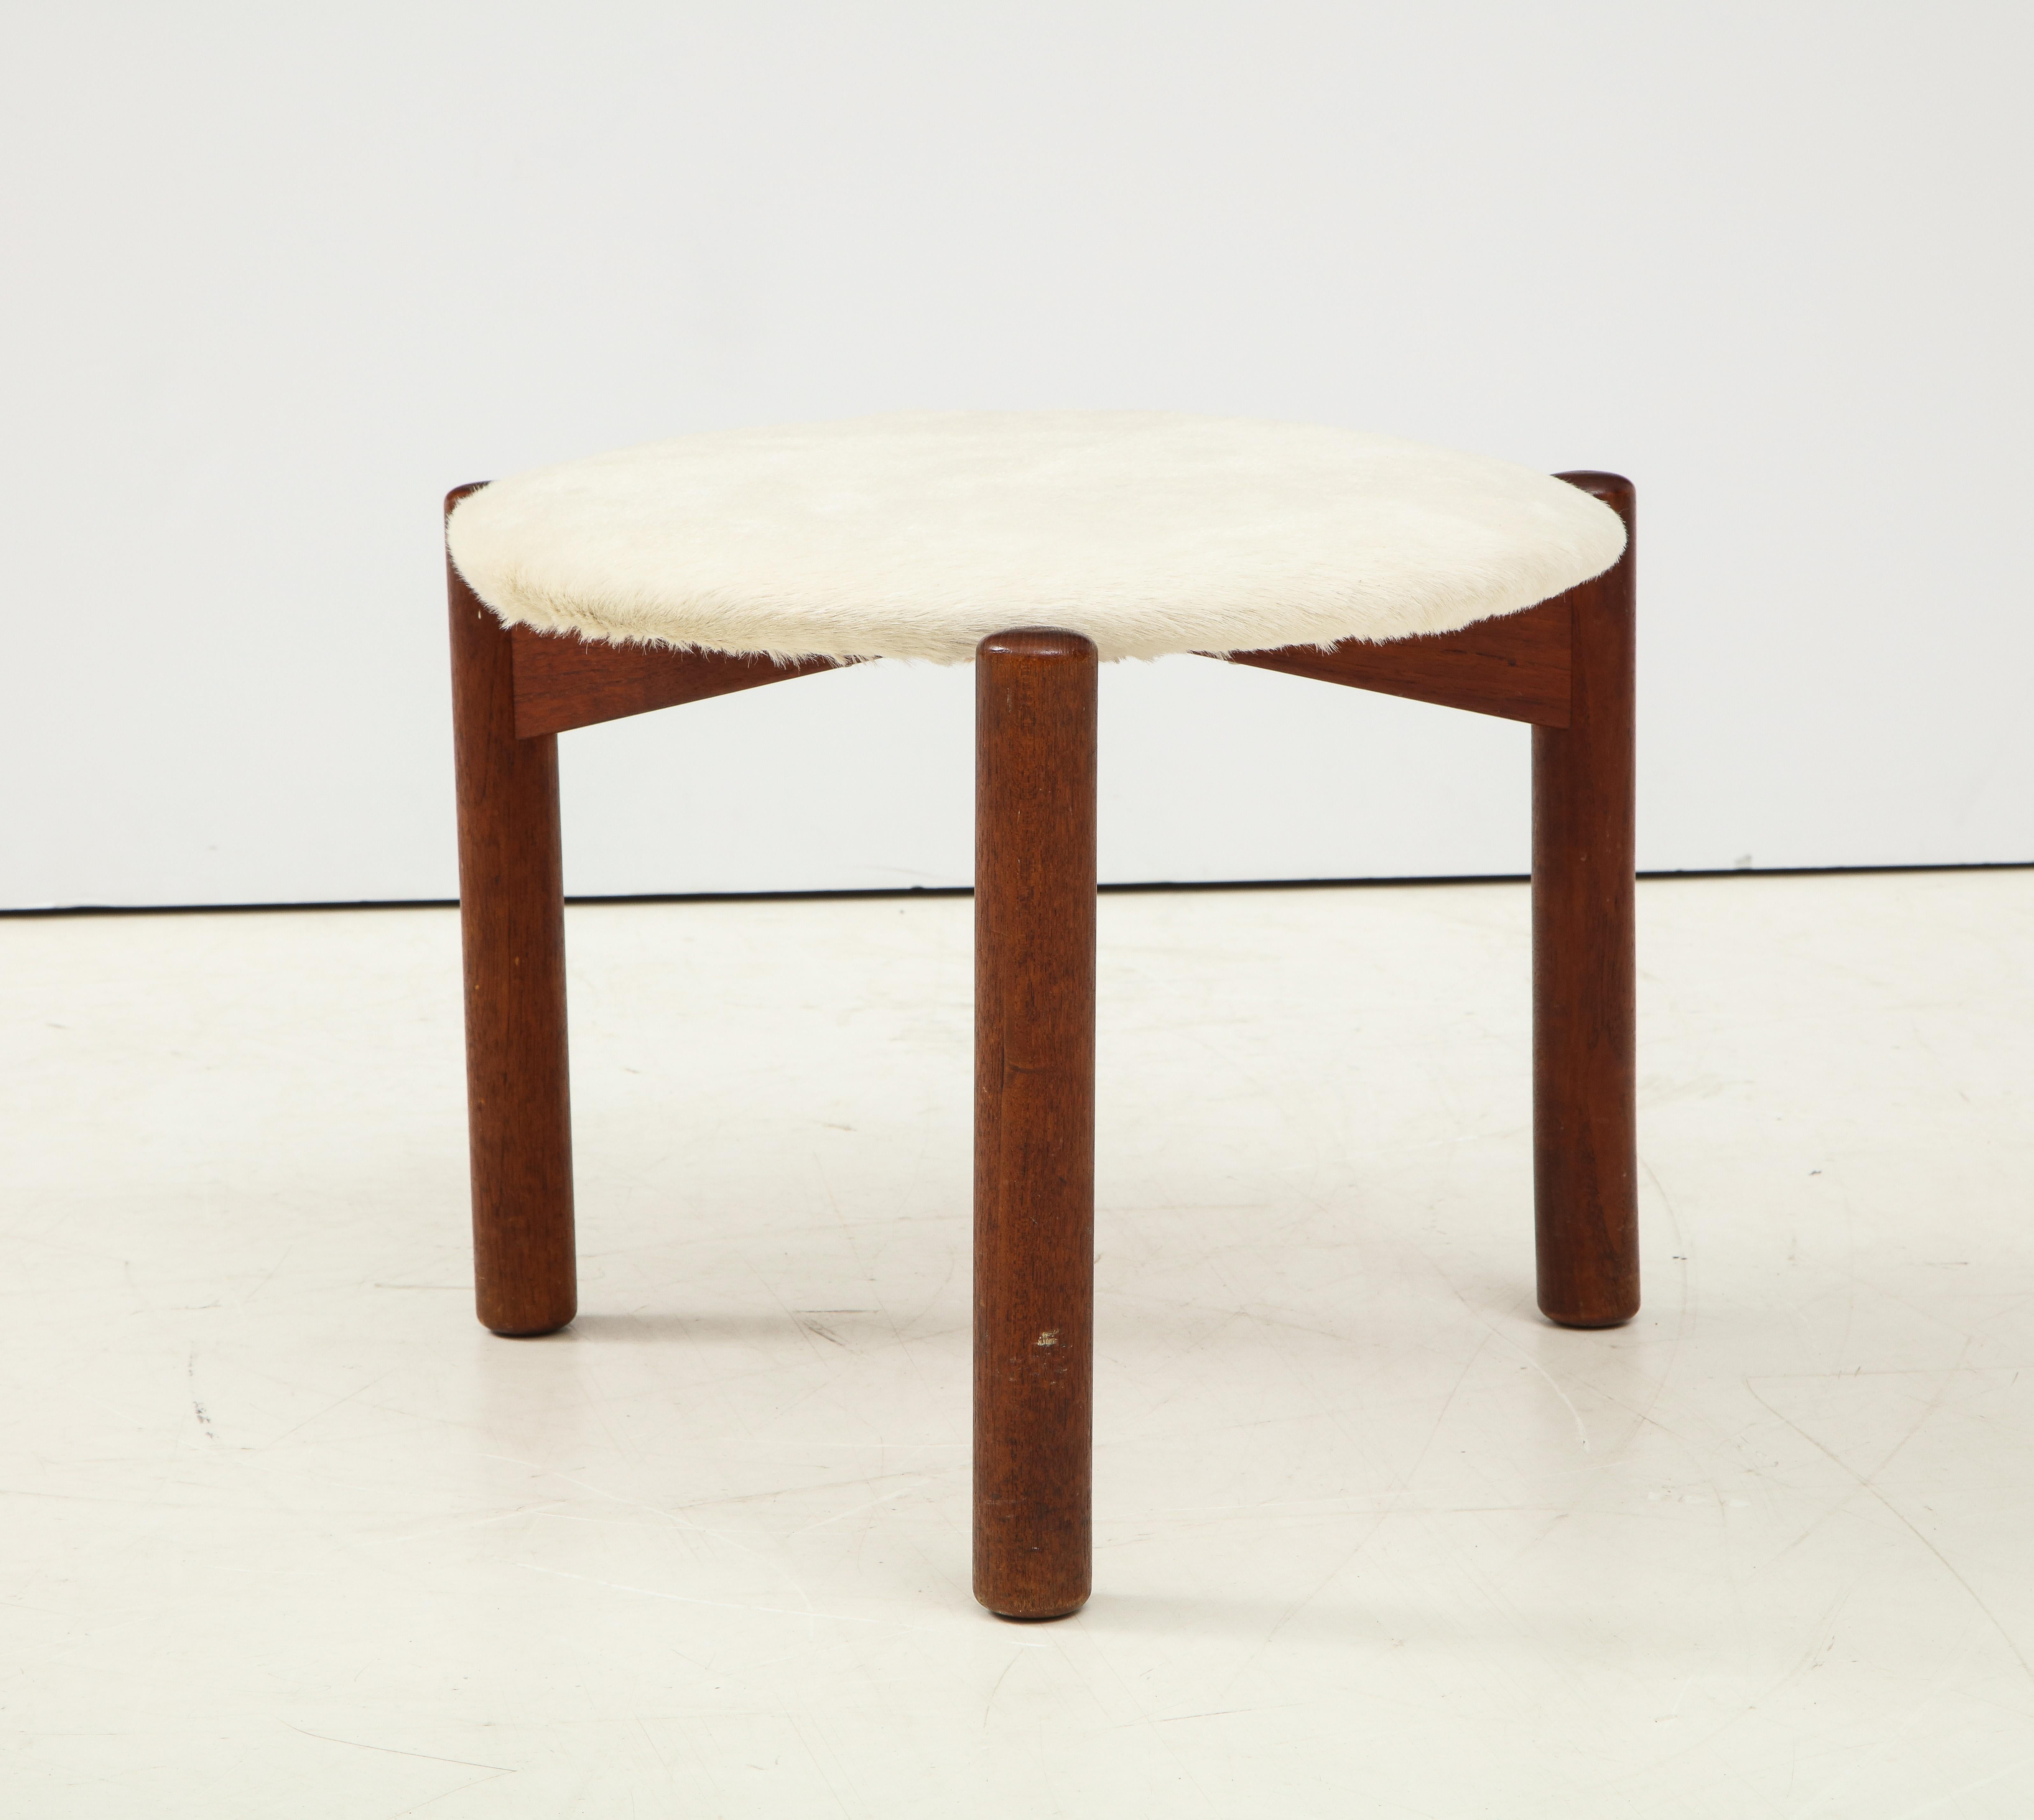 Vintage Mid-Century Tripod Stool with Cow Hair. 

This chic stool consists of a sleek tripod base, tubular hardwood legs, and a sizable round seat upholstered a plush off-white cow hair. 

The frame of the stool has been lightly refinished and